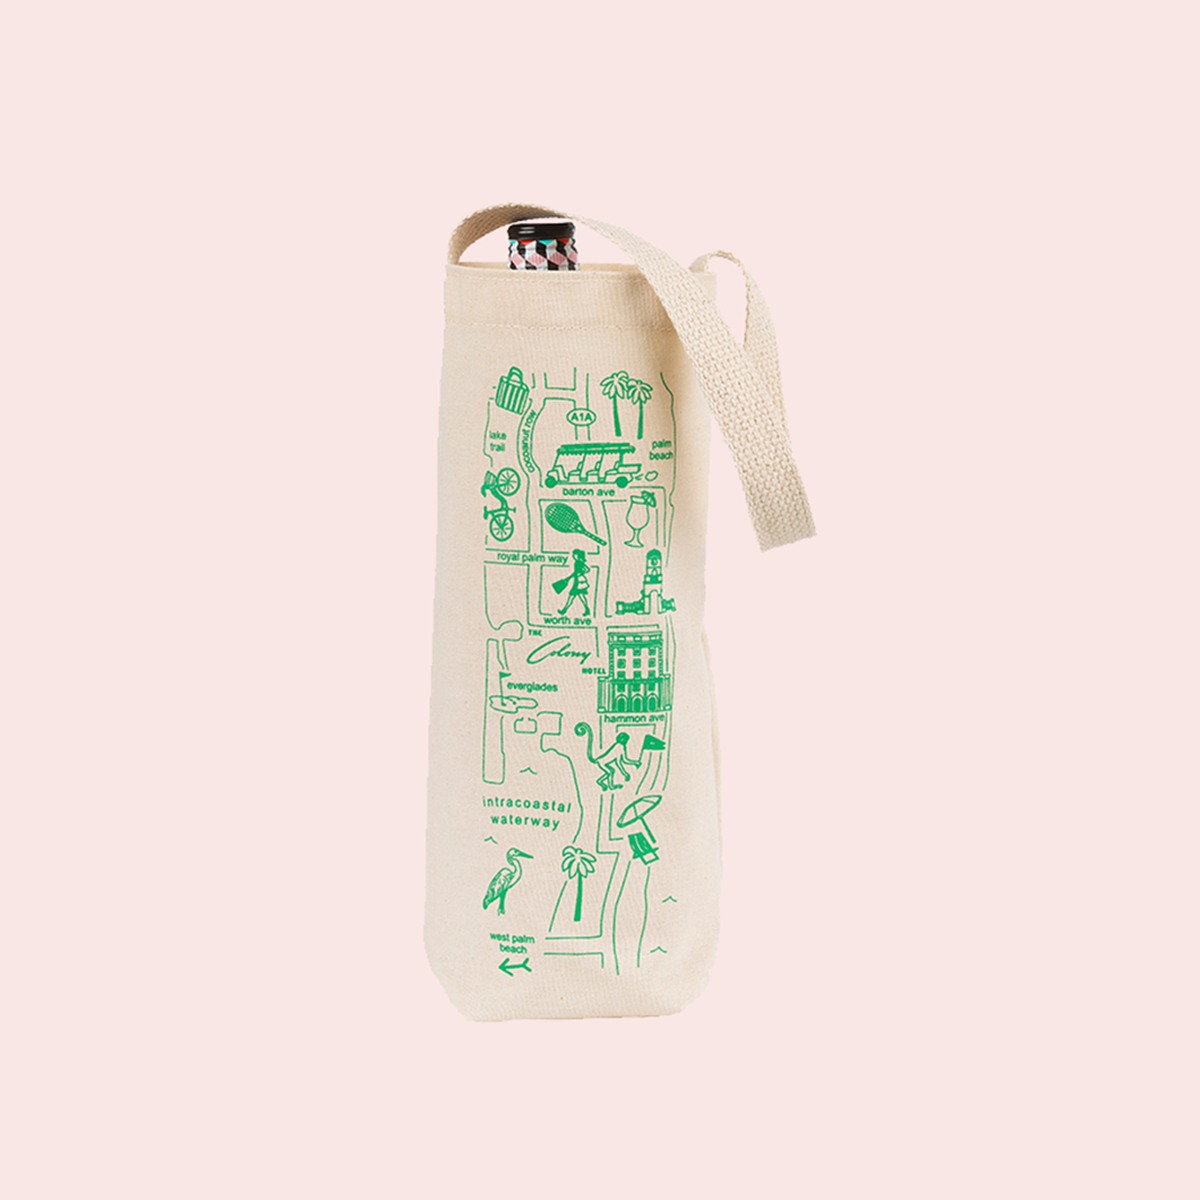 THE COLONY HOTEL MAPTOTE WINE BAG